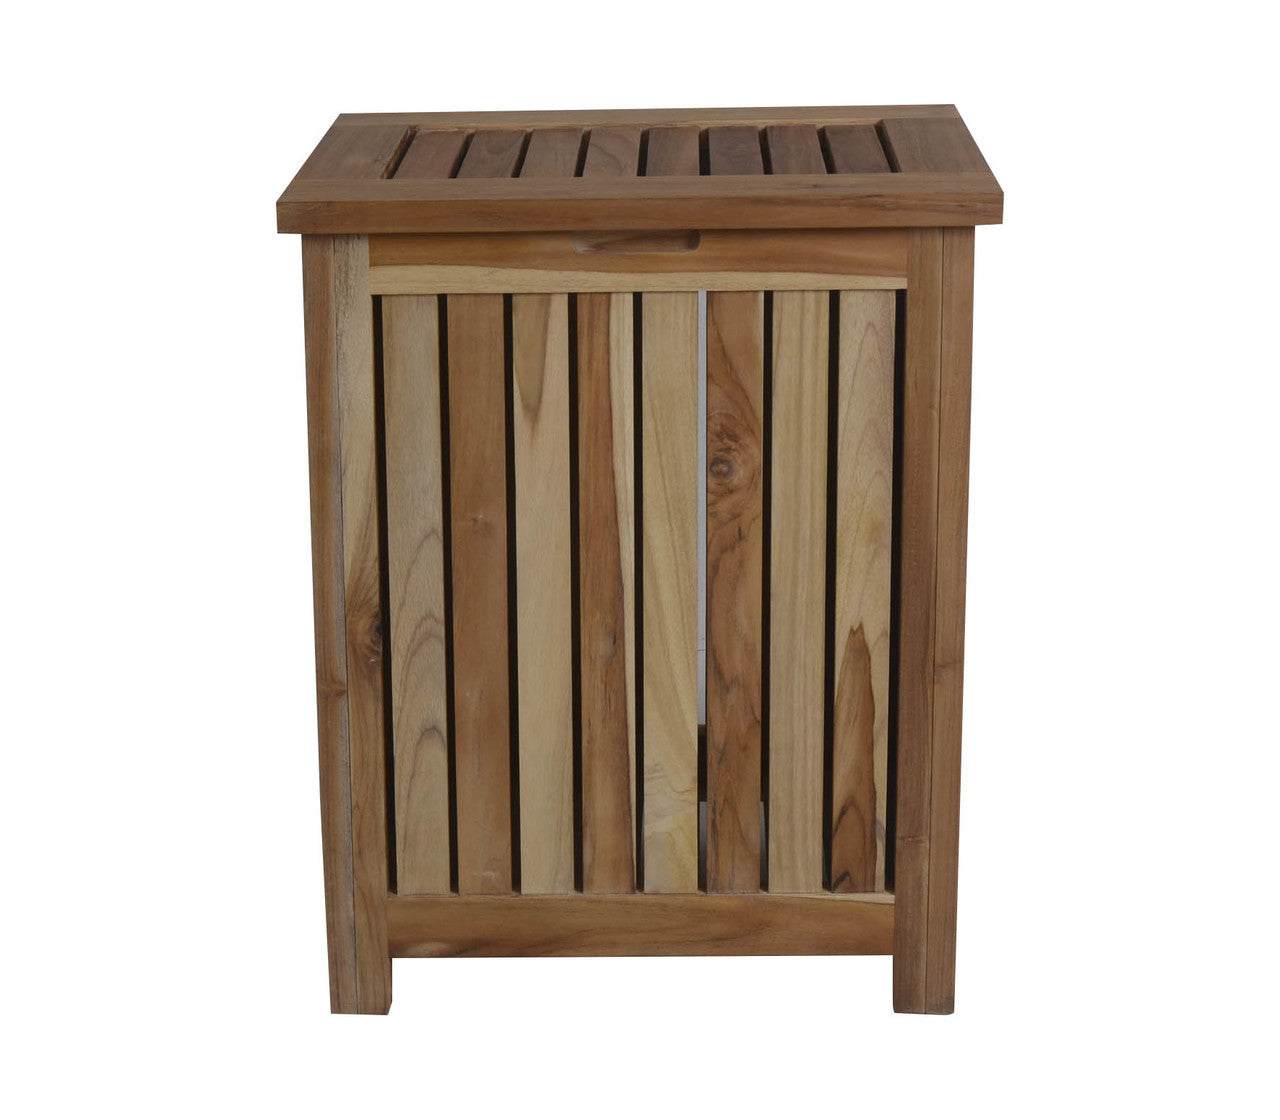 EcoDecors® Eleganto® 18" Teak Wood Double Laundry Storage Hamper with Removable Bags in EarthyTeak Finish